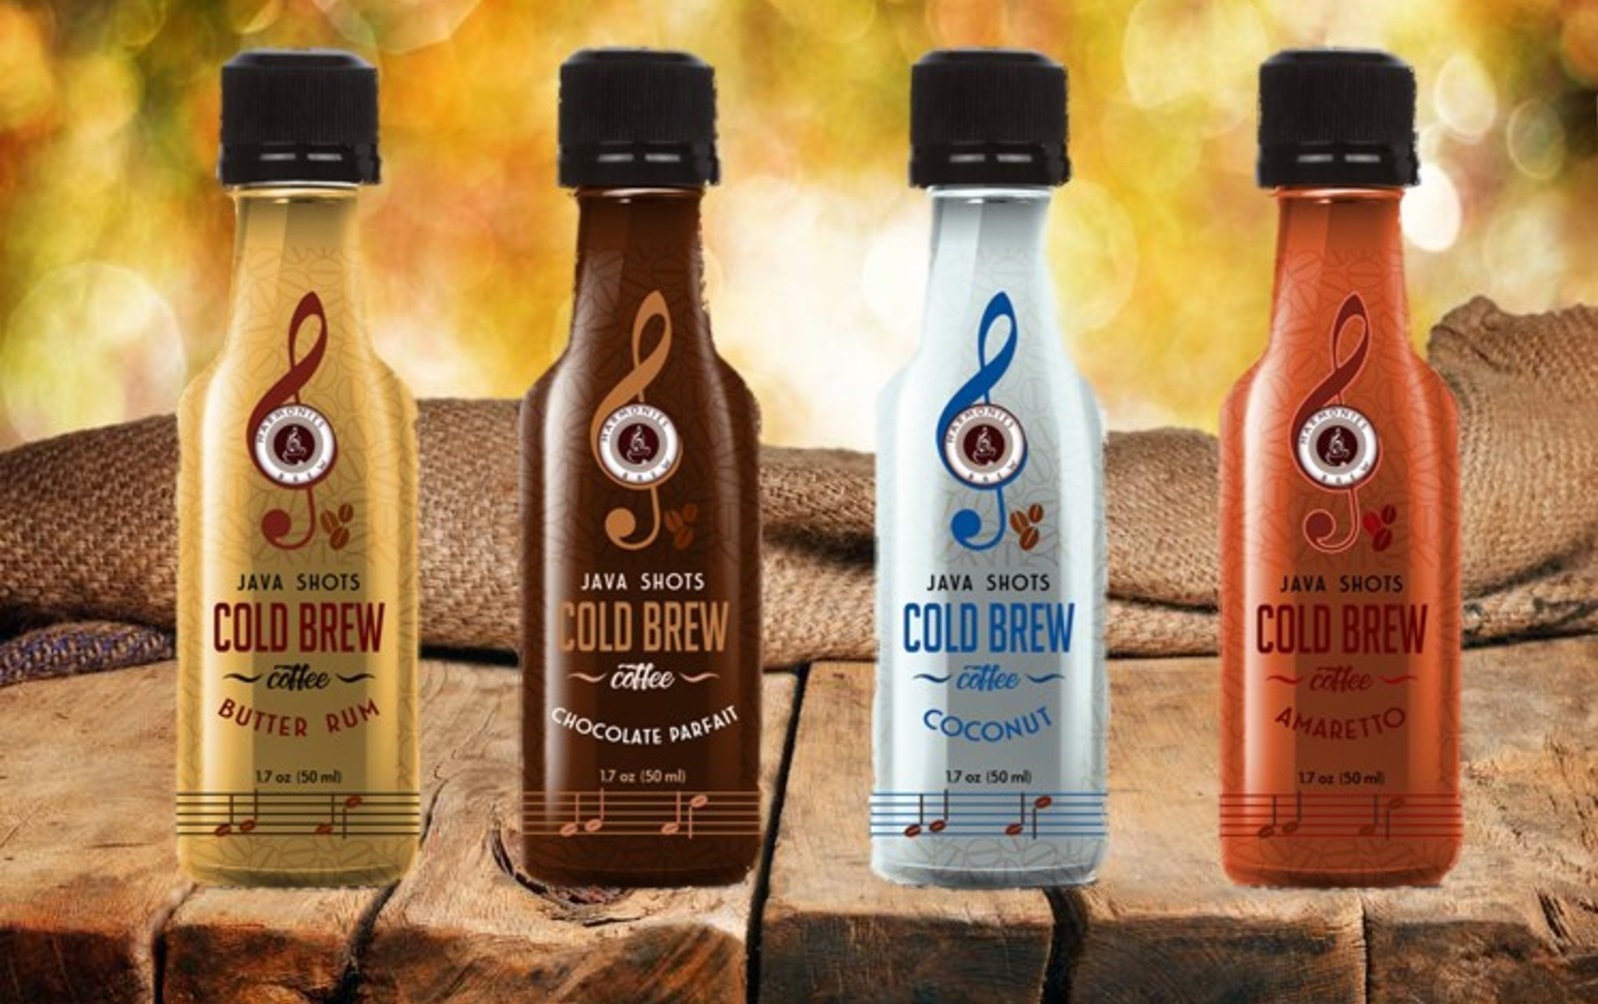 Java Shots Releases New Cold Brew Coffee Line